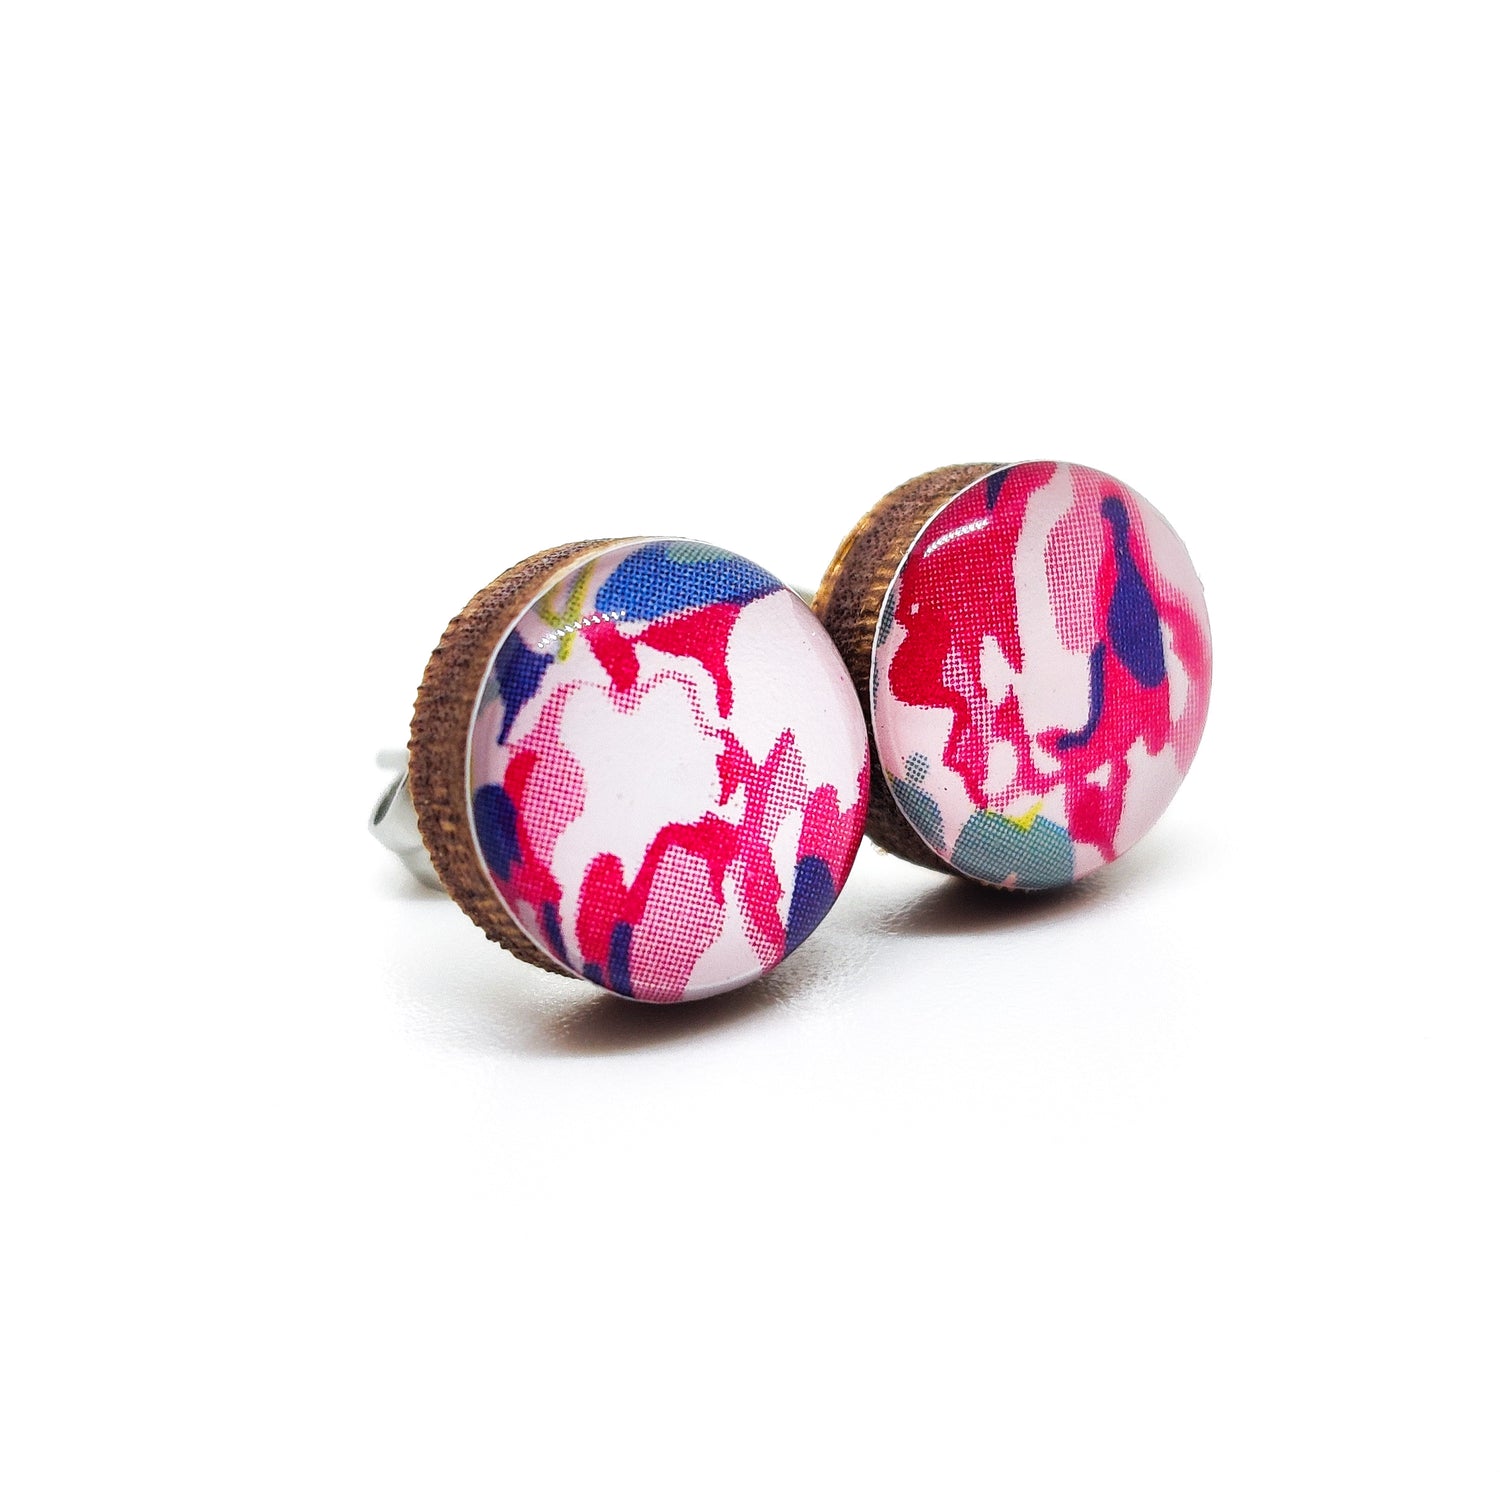 Stud Earrings, Watercolor Floral, 10 mm, Handmade, Stainless Steel Posts for Sensitive Ears - Candi Cove Designs 